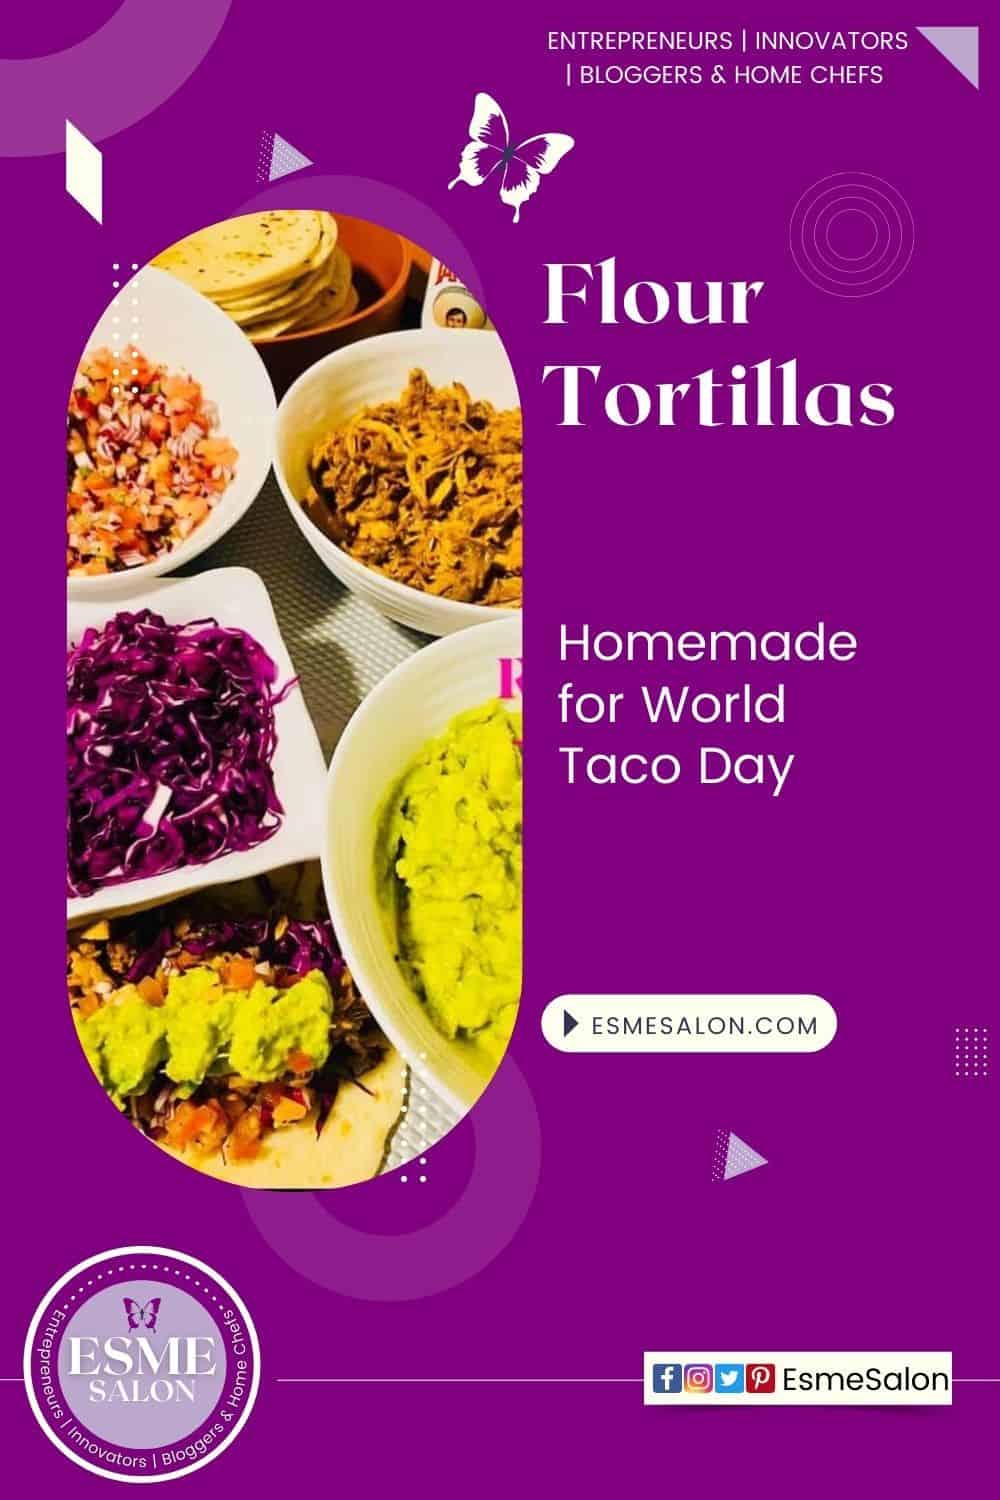 Flour Tortillas with trimmings for World Taco Day